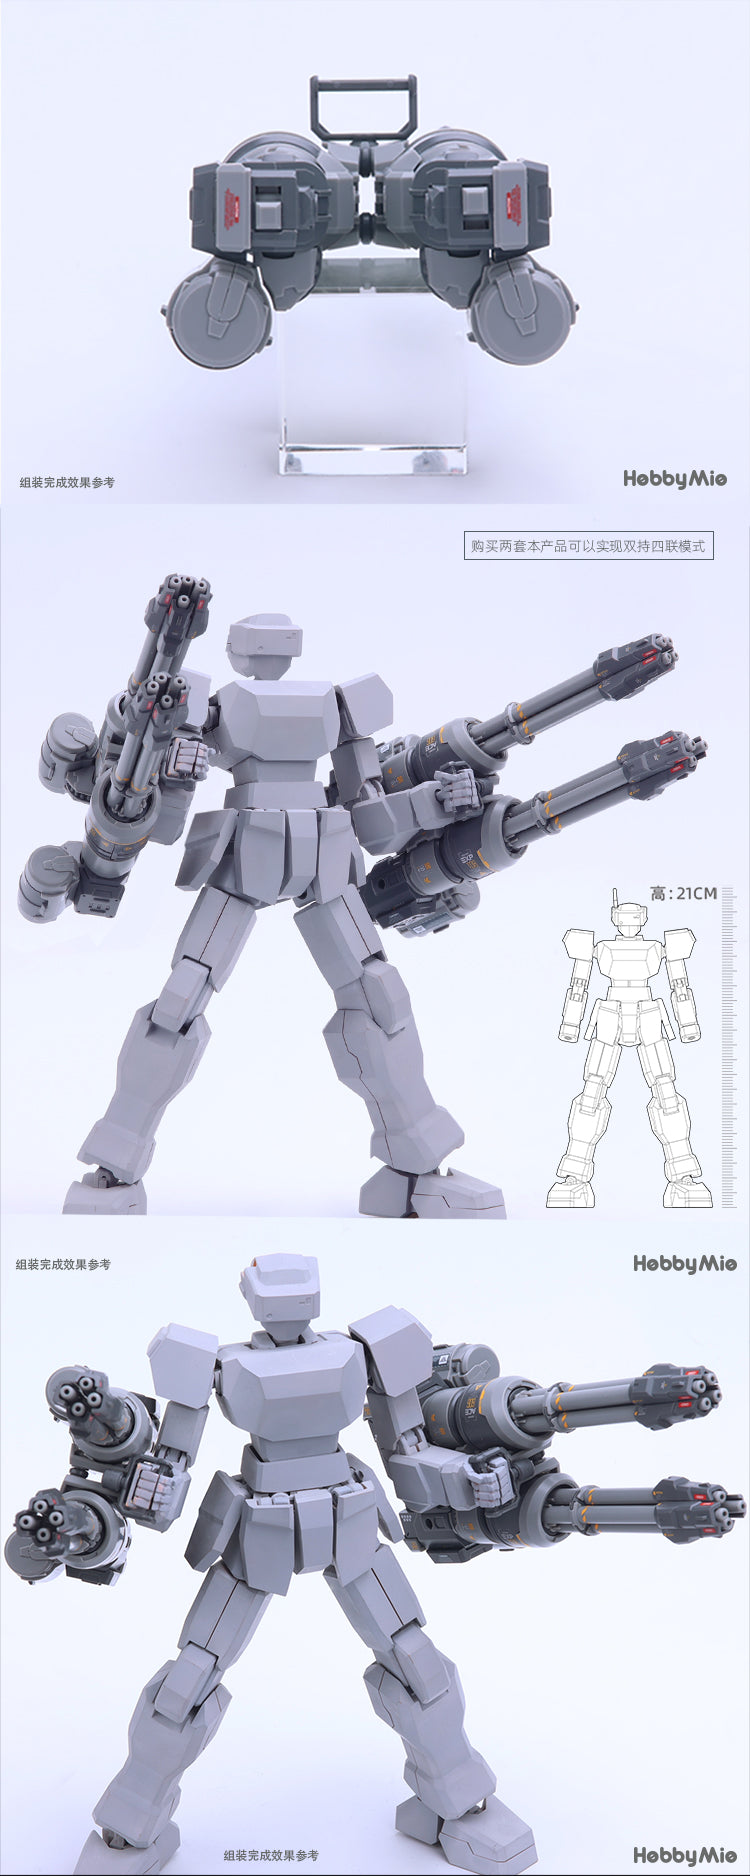 Hobby Mio Electric Drive Gatling Cannon WK-01